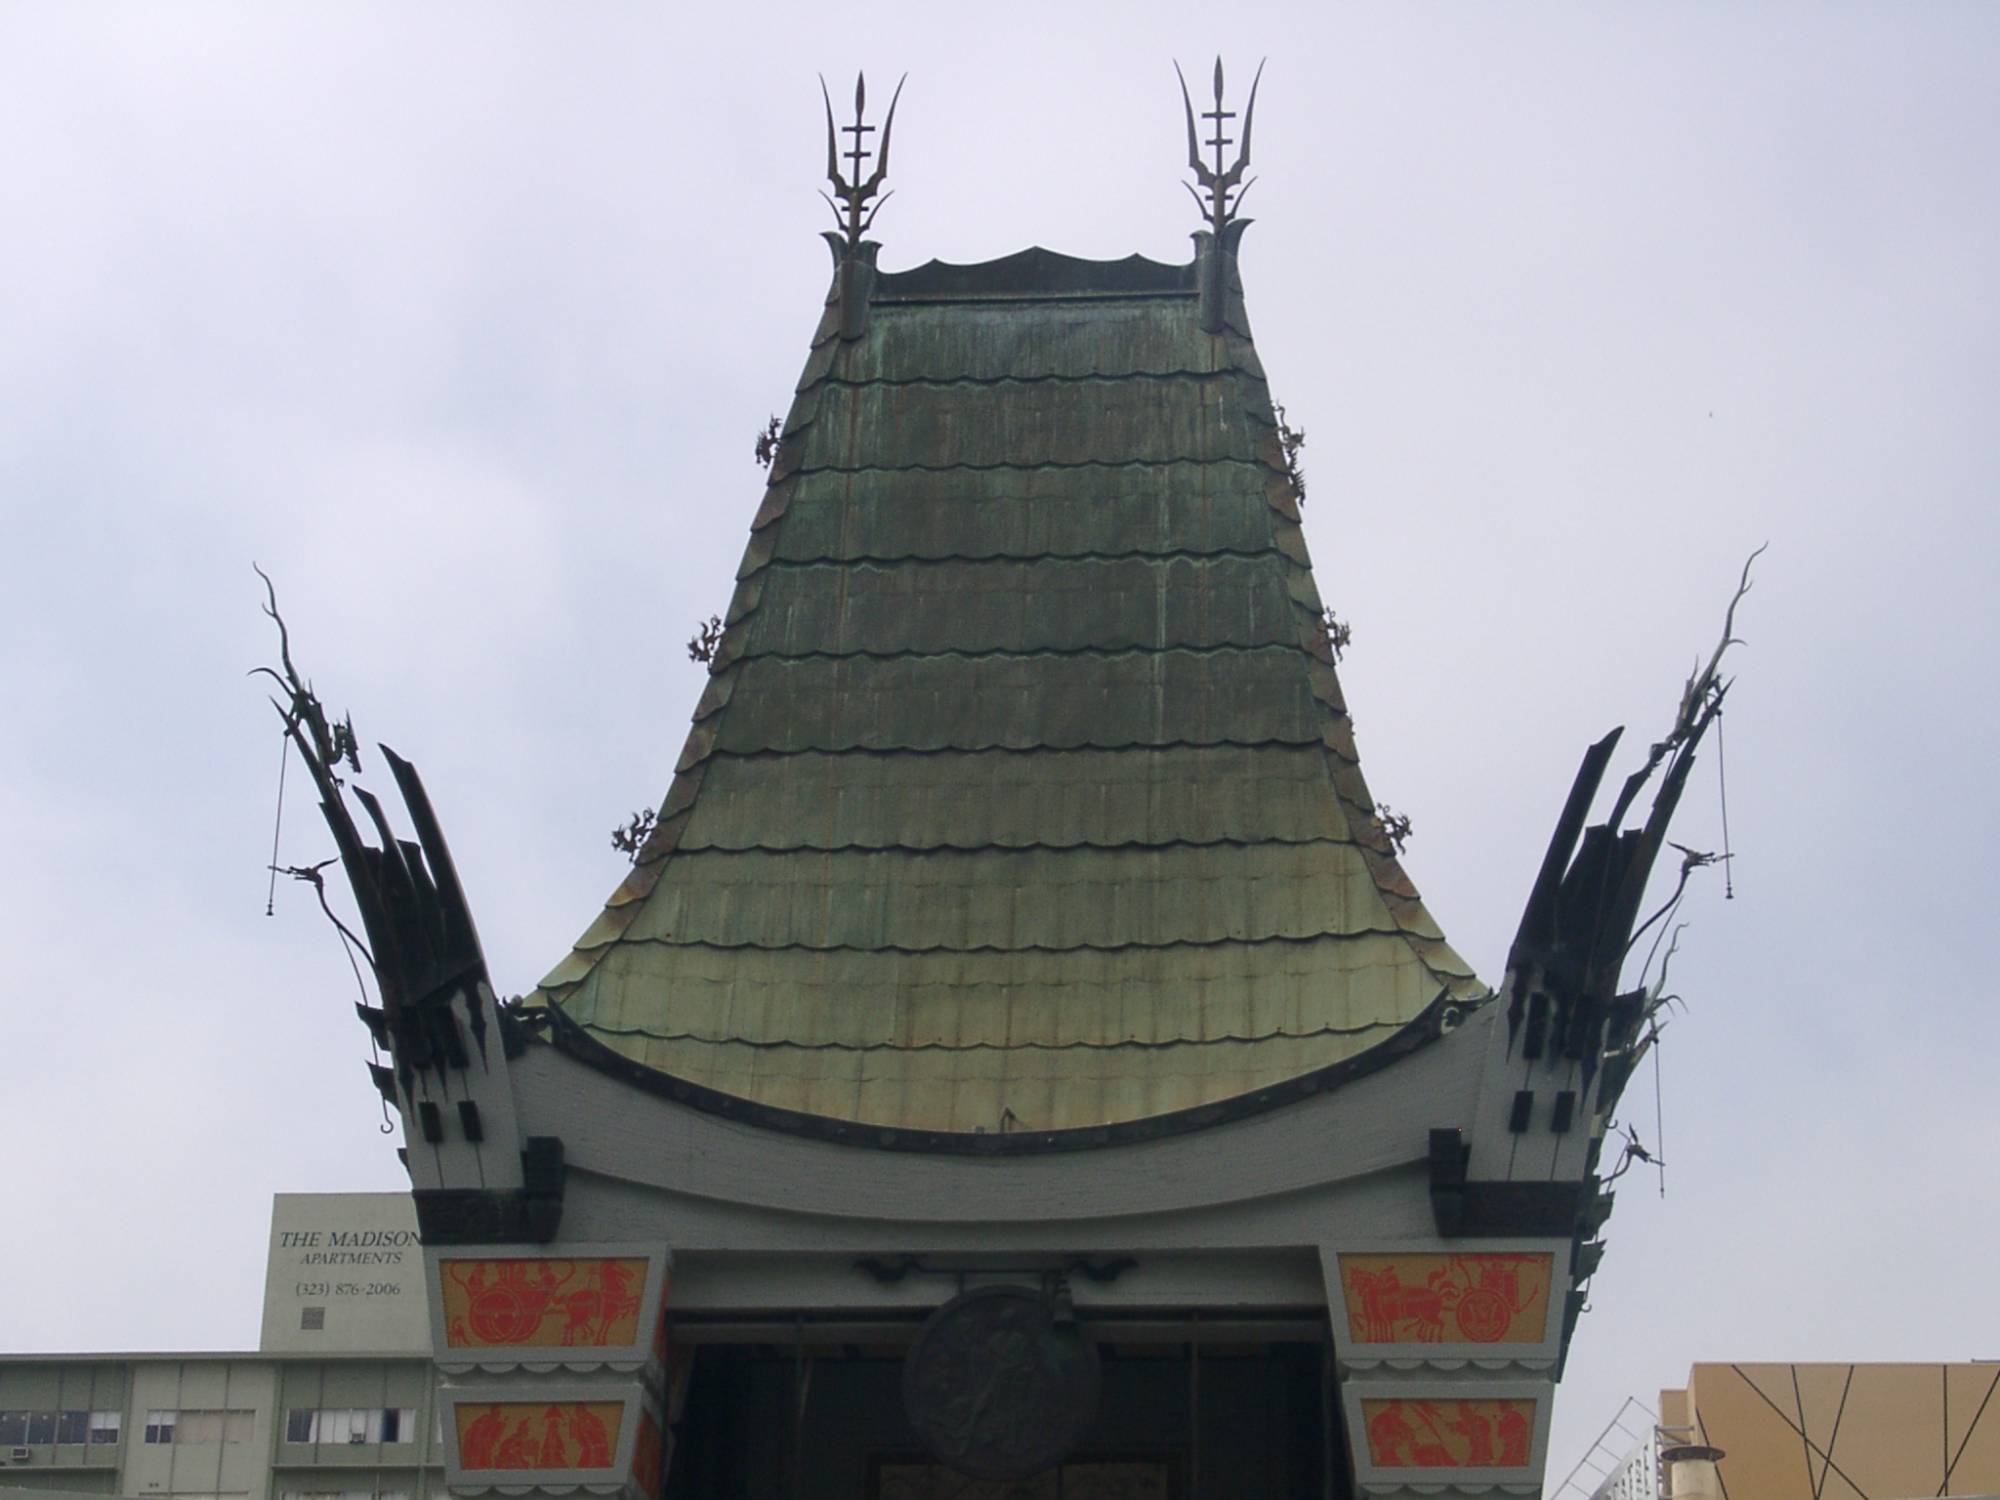 Hollywood, CA - Graumm's Chinese Theatre